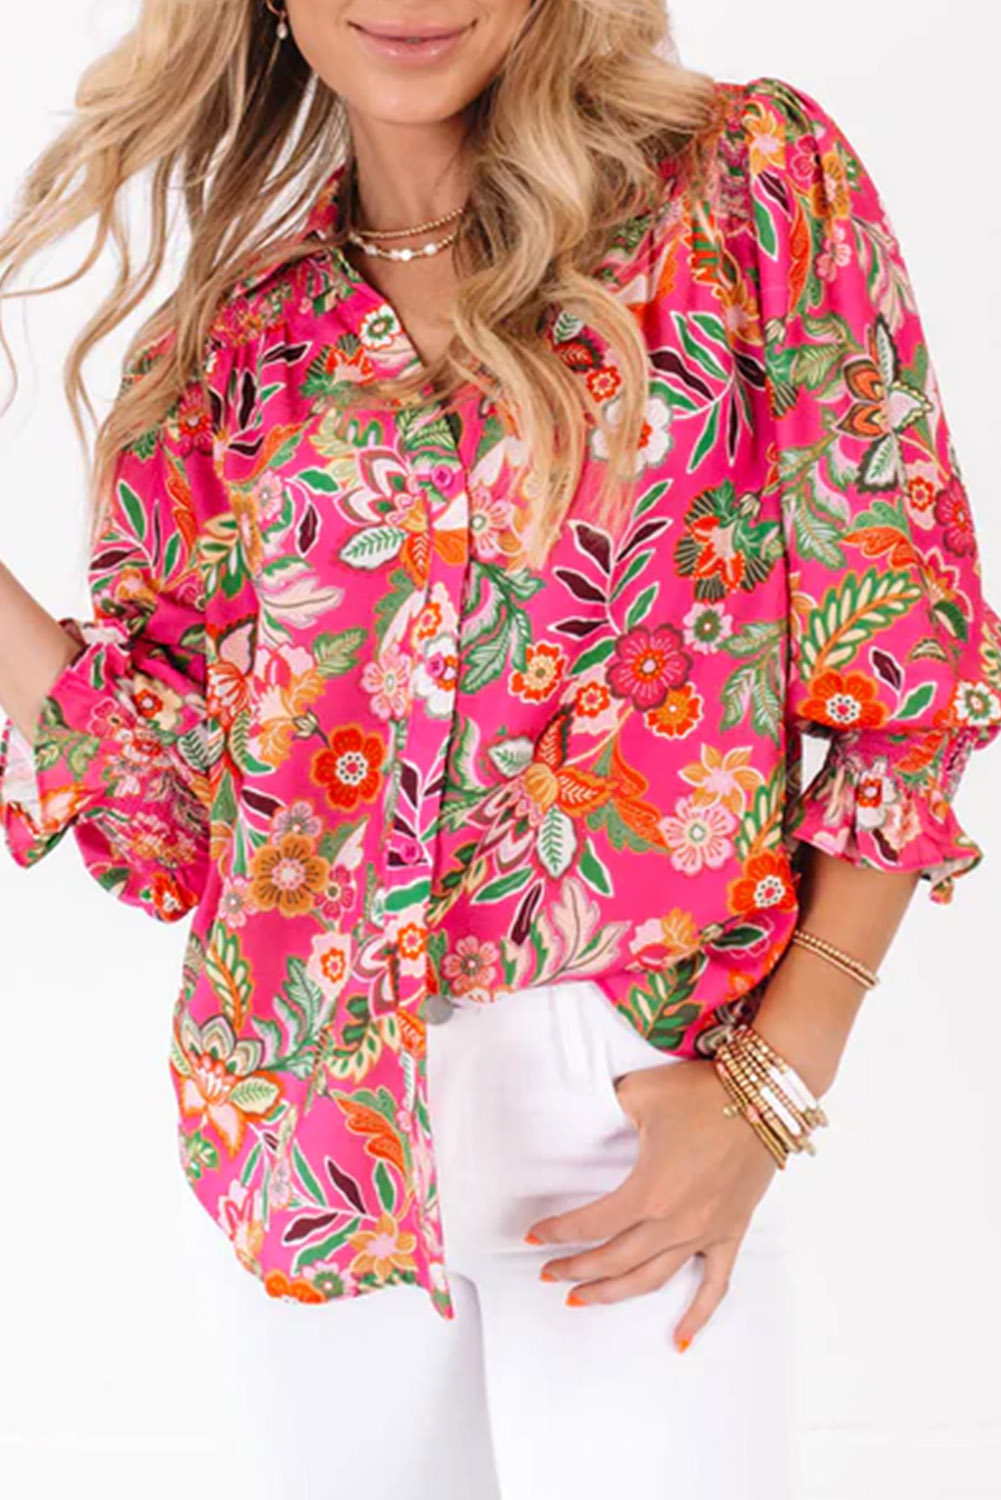 Shewin Wholesale WESTERN Clothing  Pink Floral Print Puff Sleeve Shirred Cuffs Boho Shirt